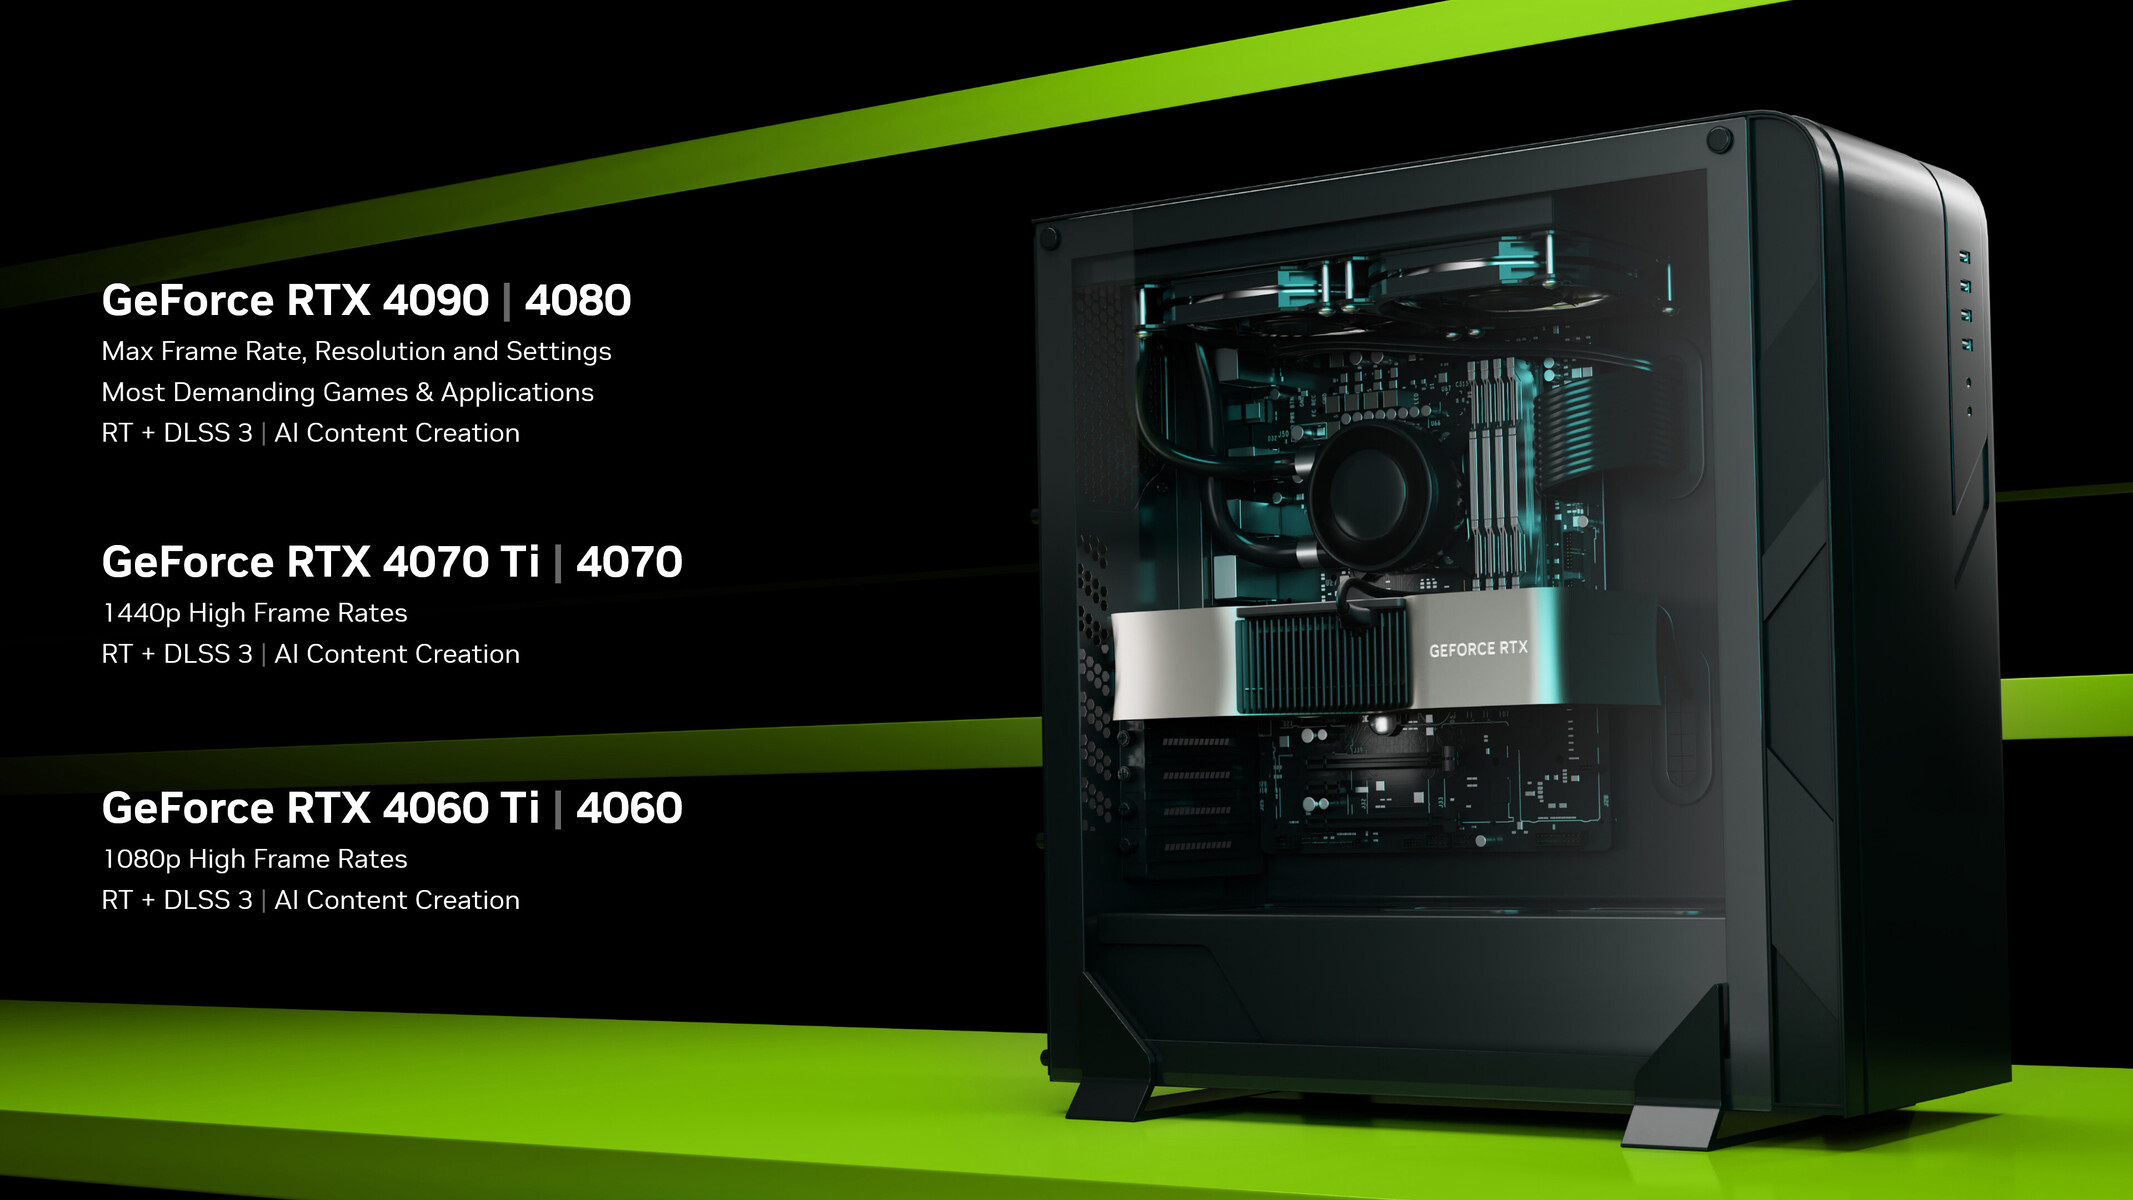 Nvidia Provides Details On Vram Usage, Memory Subsystem And Cache On Rtx 40 Cards